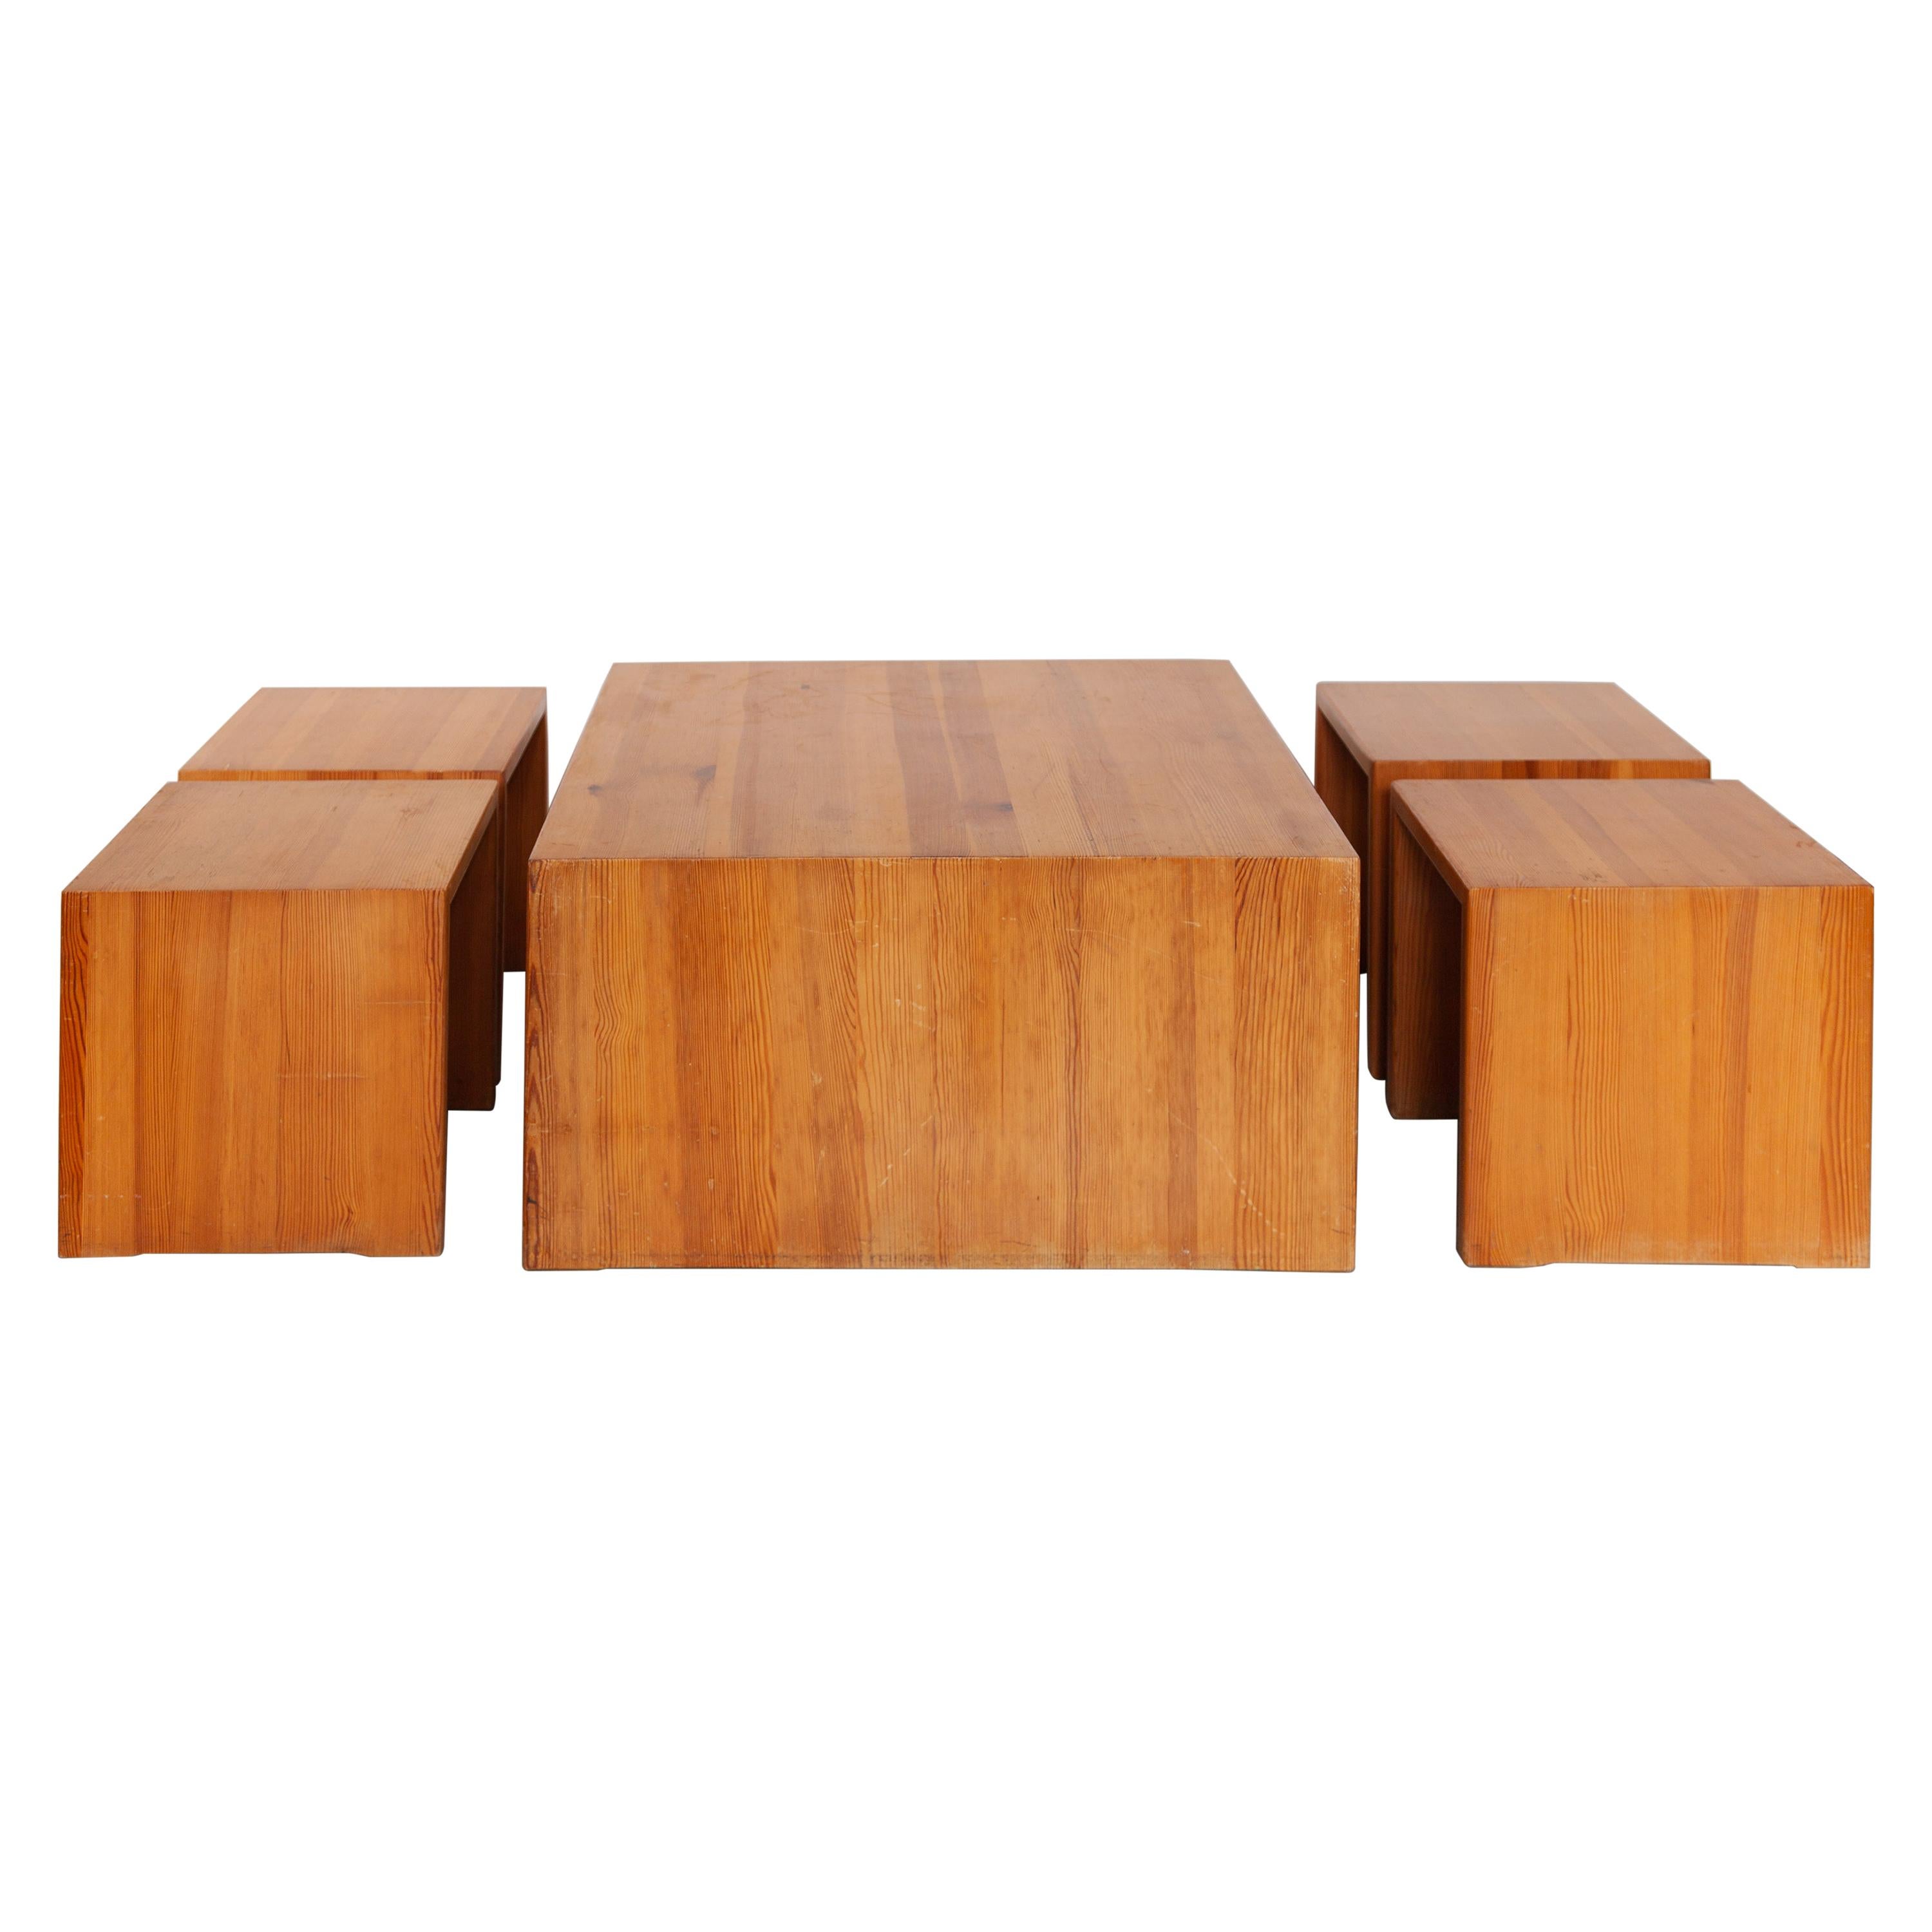 Set of Four Solid Pine Stools and One Coffee Table, 1970s